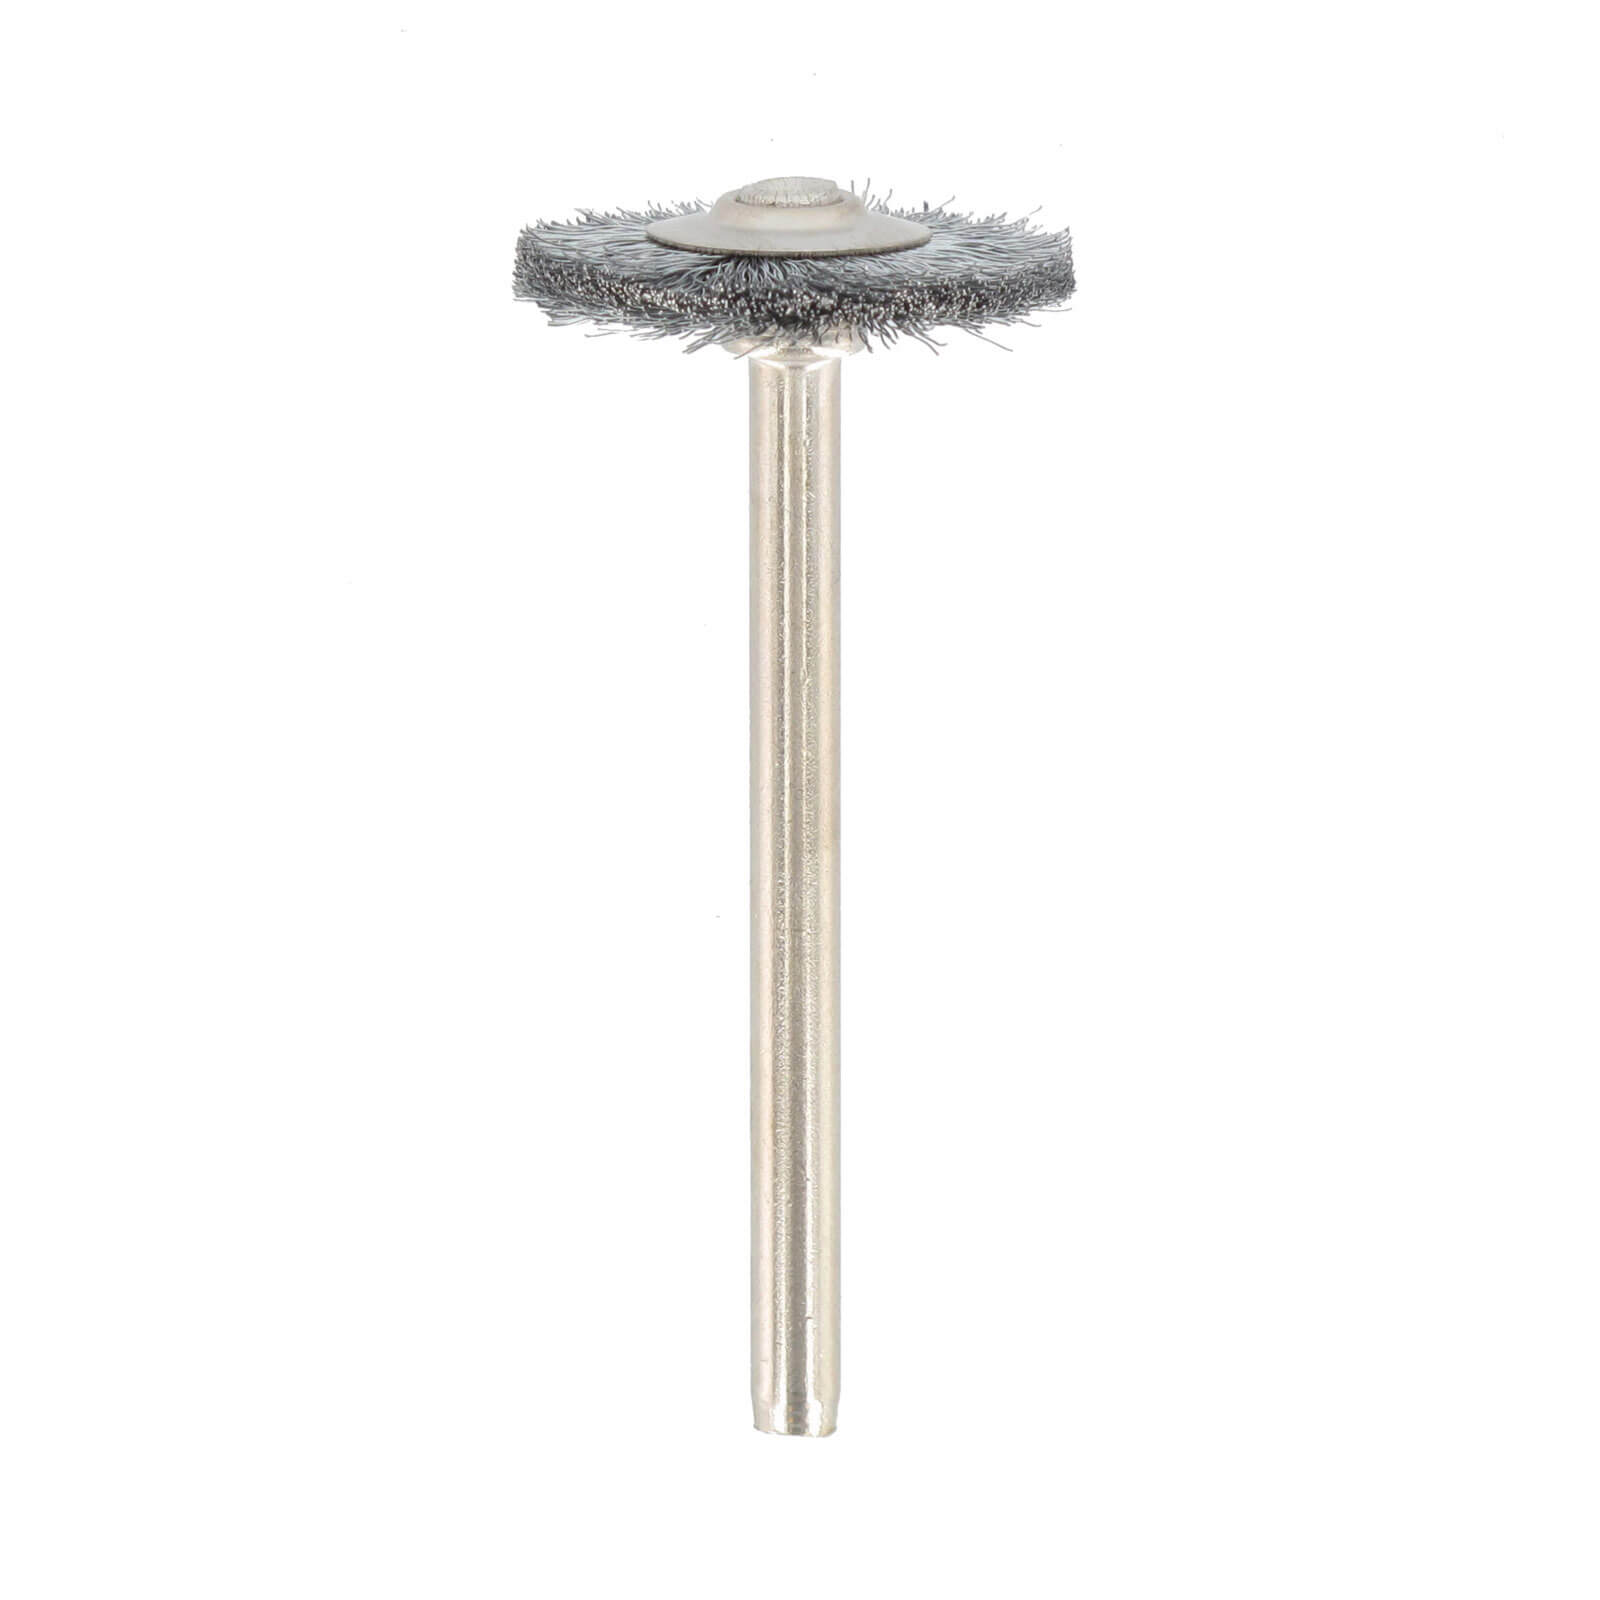 Photo of Dremel 428 Carbon Steel Wire Wheel Brush 19mm Pack Of 2